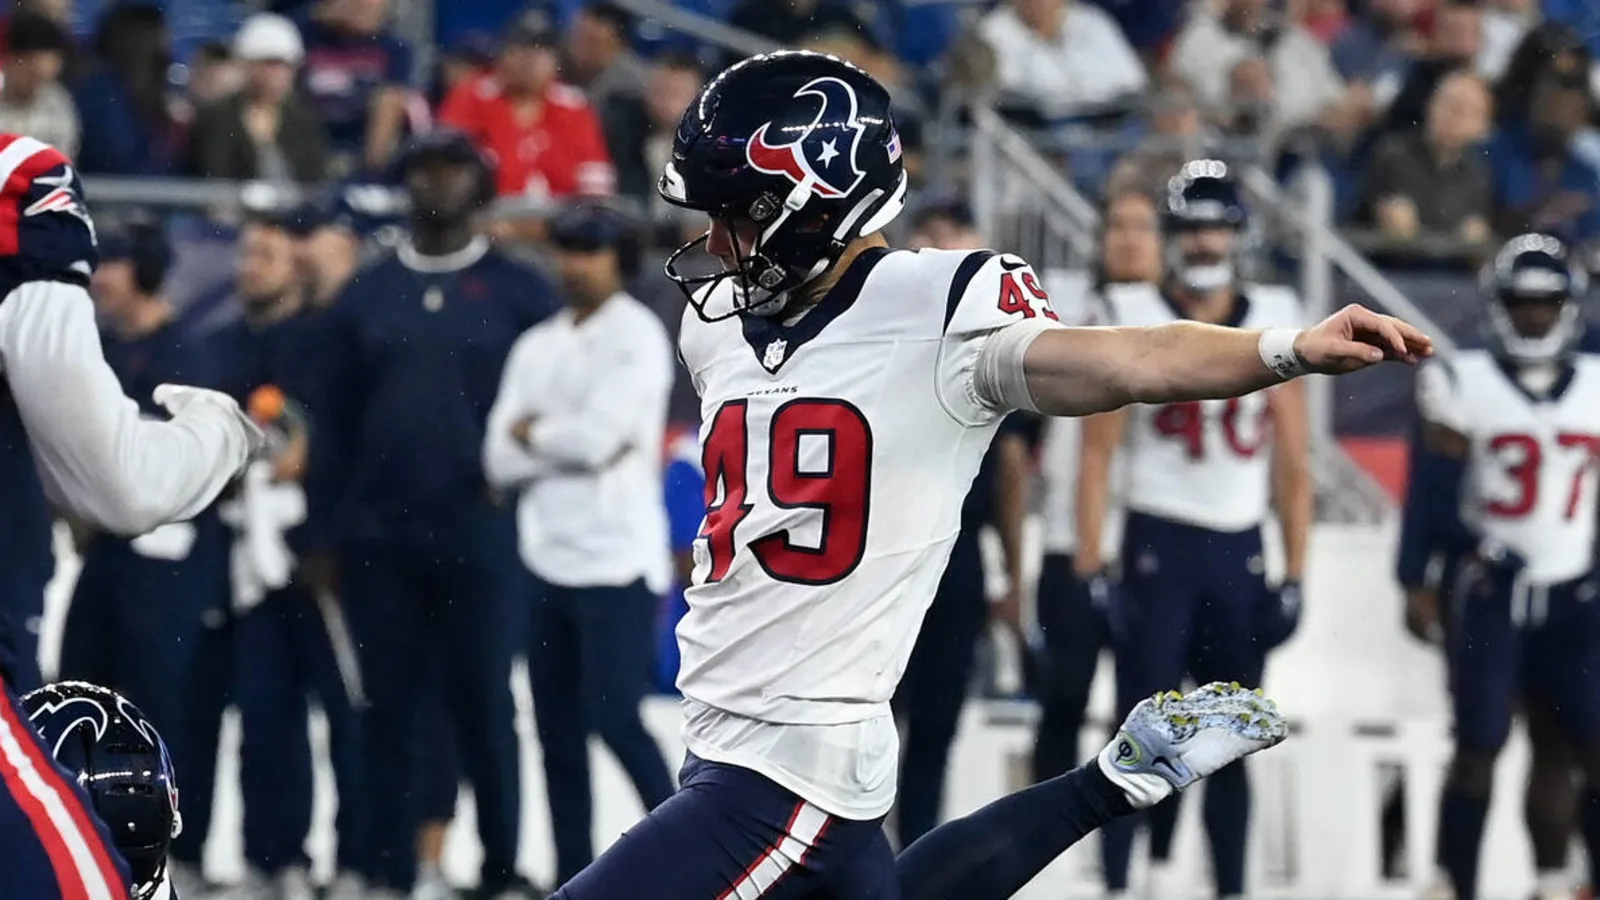 Rookie Sensation Shakes Up Football: Jake Bates's Incredible Journey from NFL Reject to UFL Star Kicker